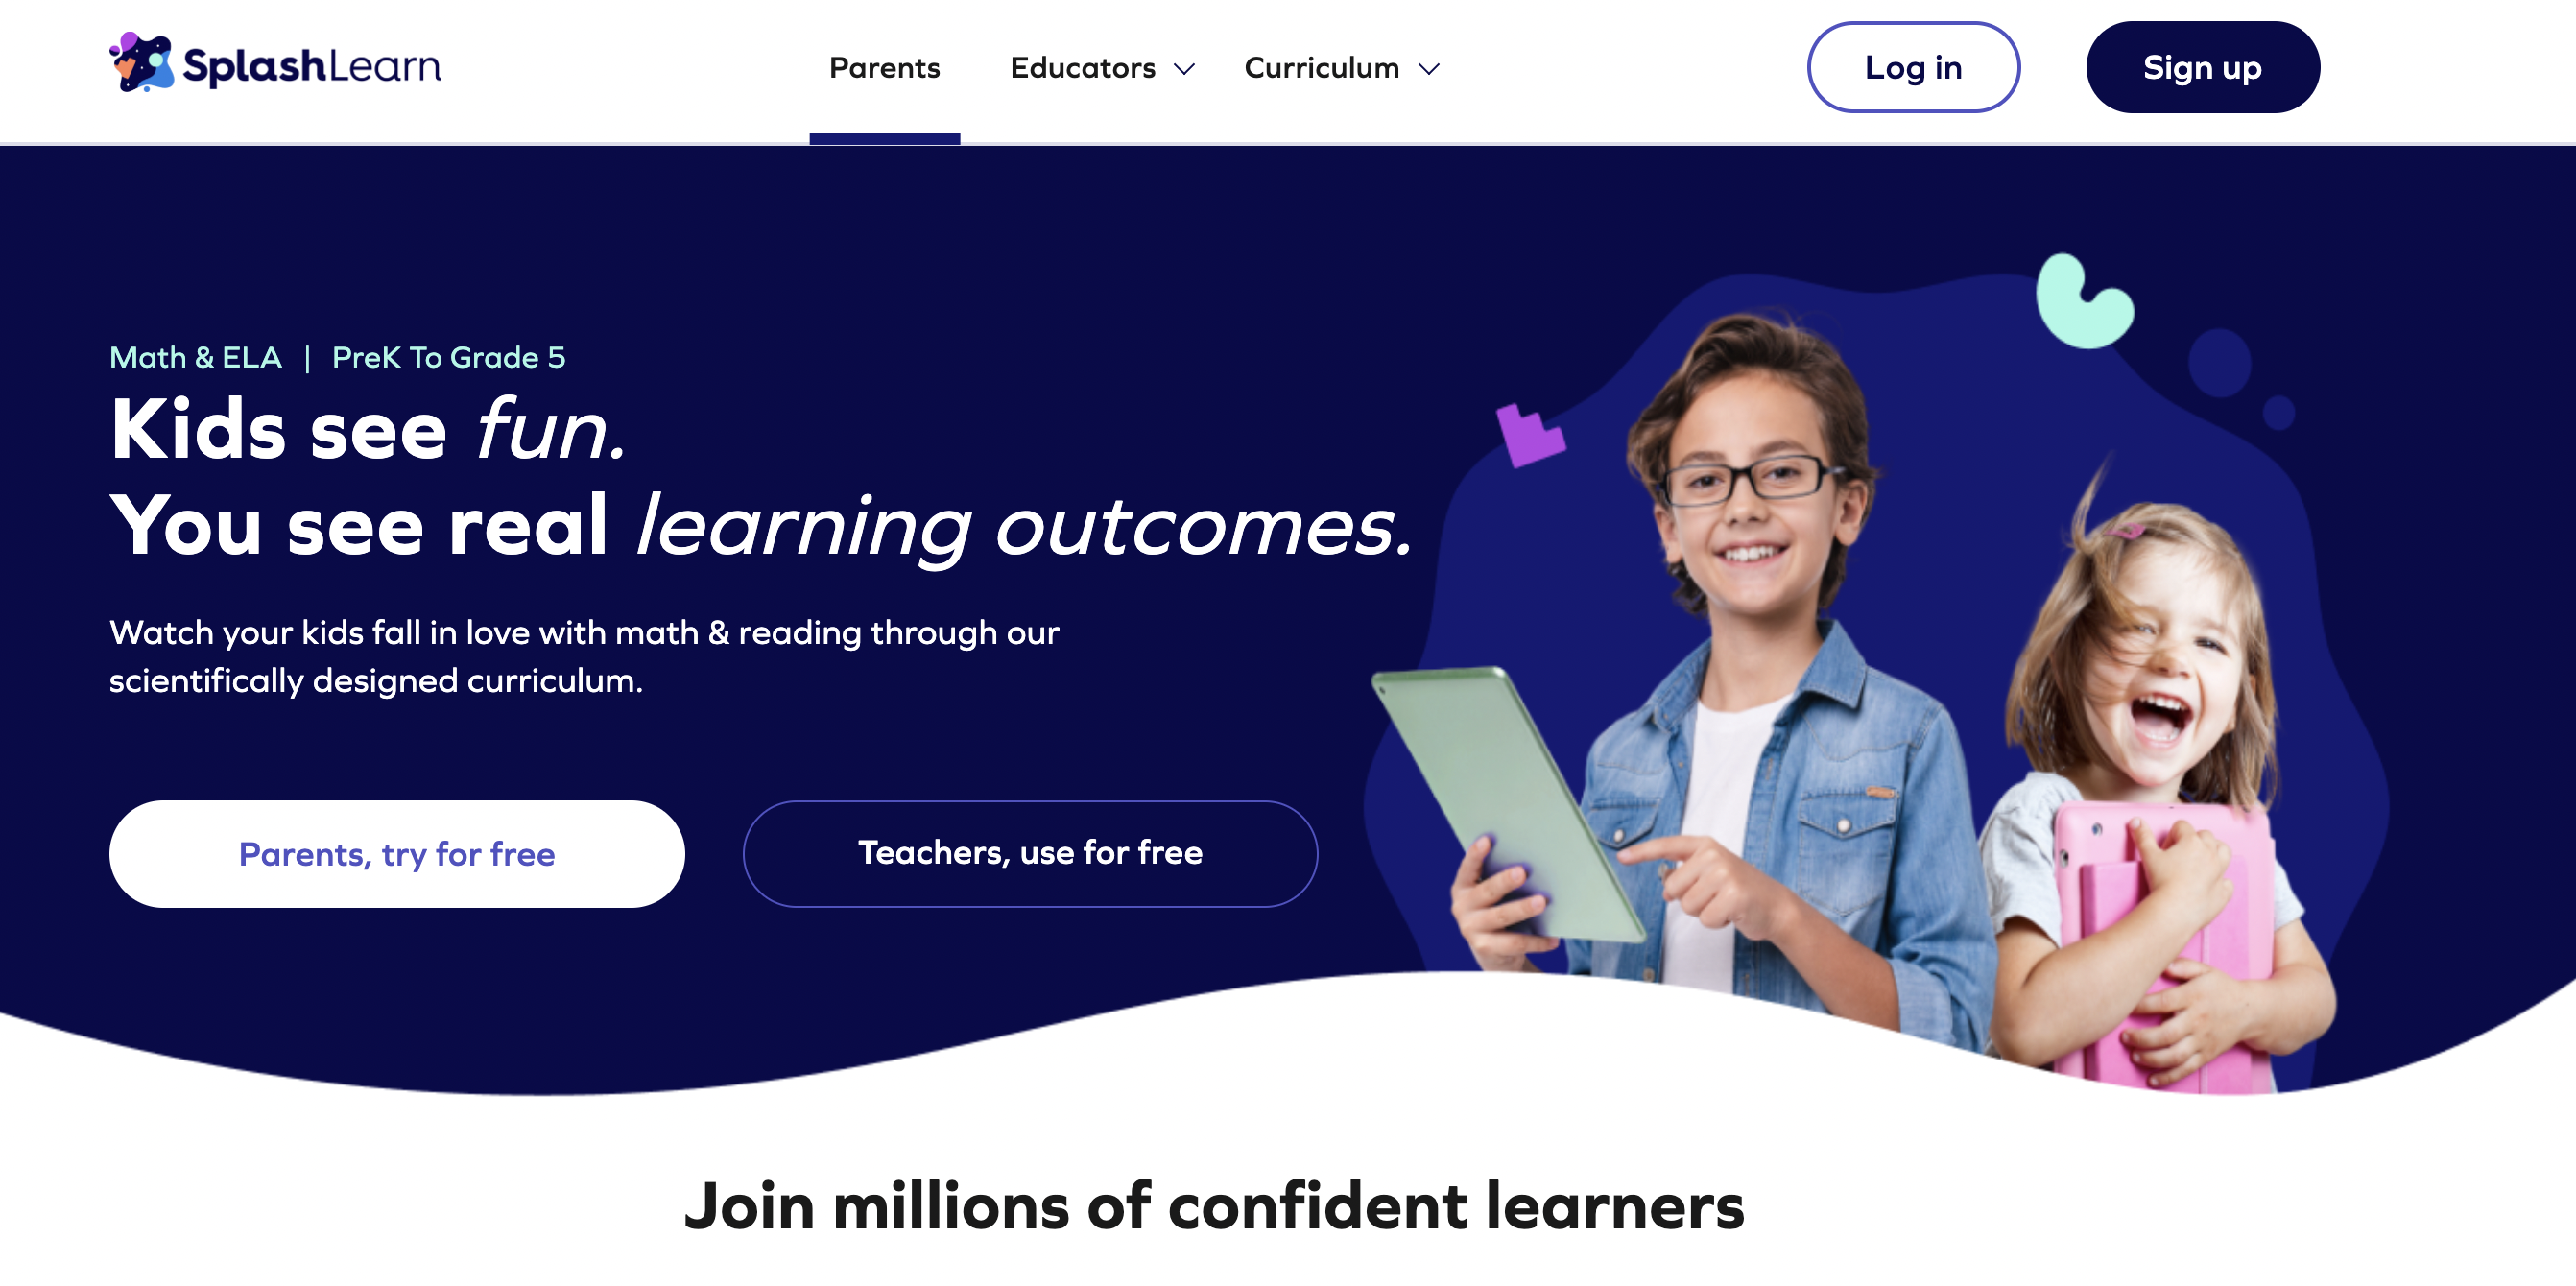 SplashLearn builds learning confidence in kids by engaging in Math and ELA games.